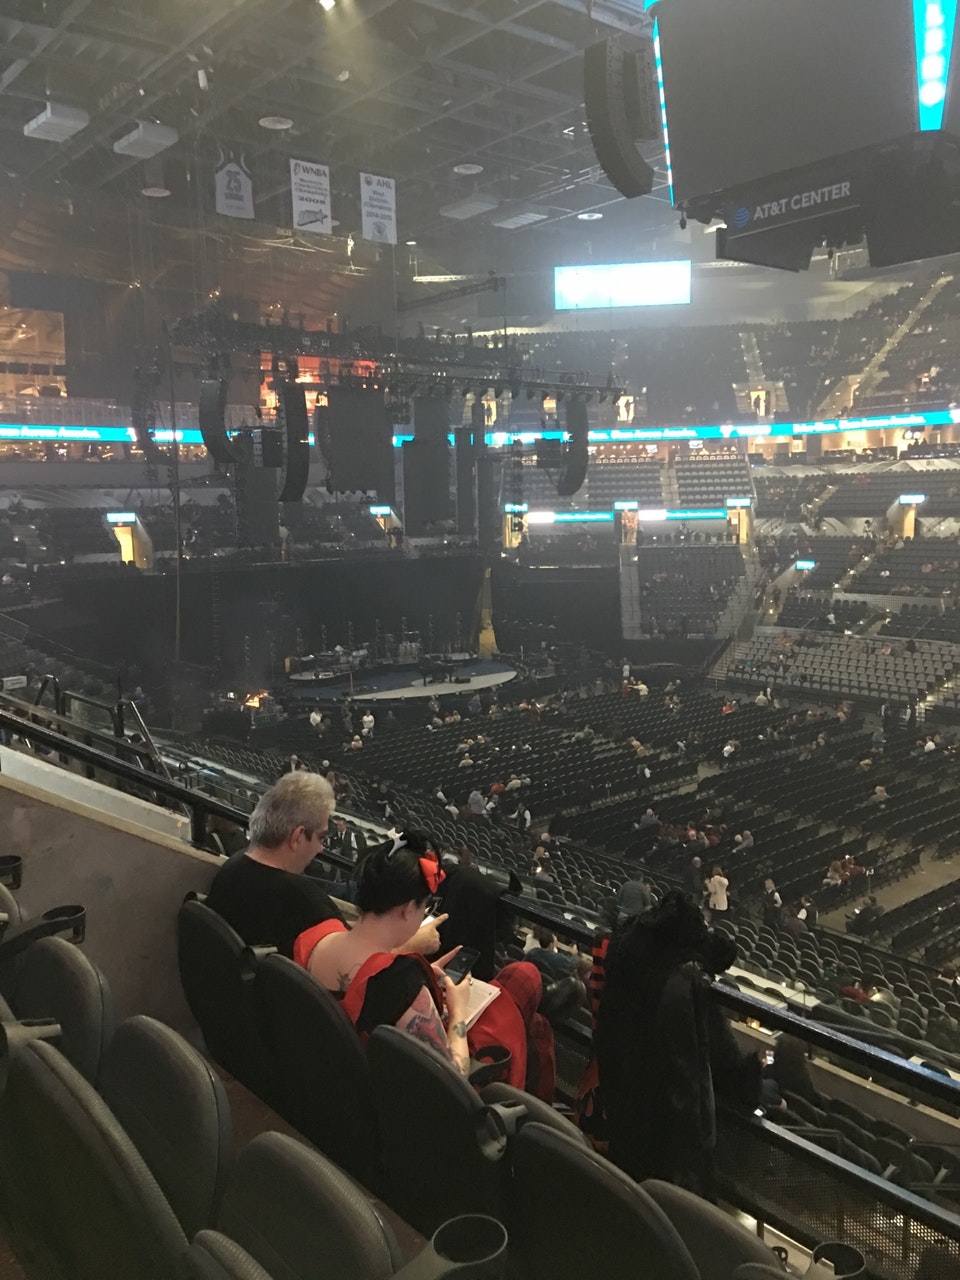 Section 207 at AT&T Center for Concerts